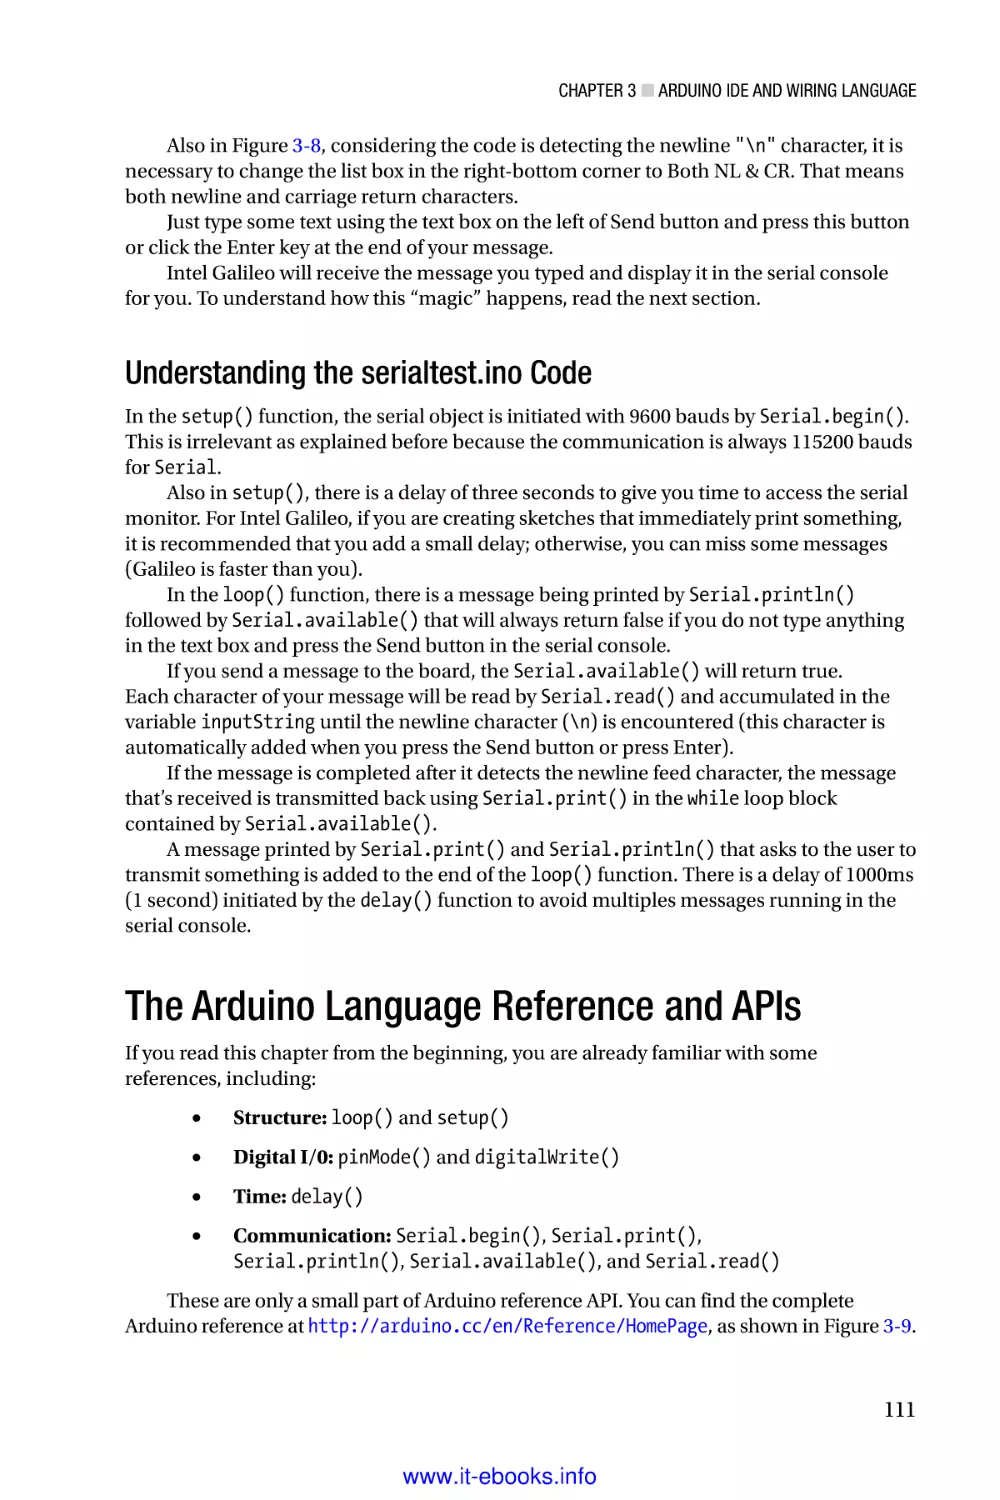 Understanding the serialtest.ino Code
The Arduino Language Reference and APIs